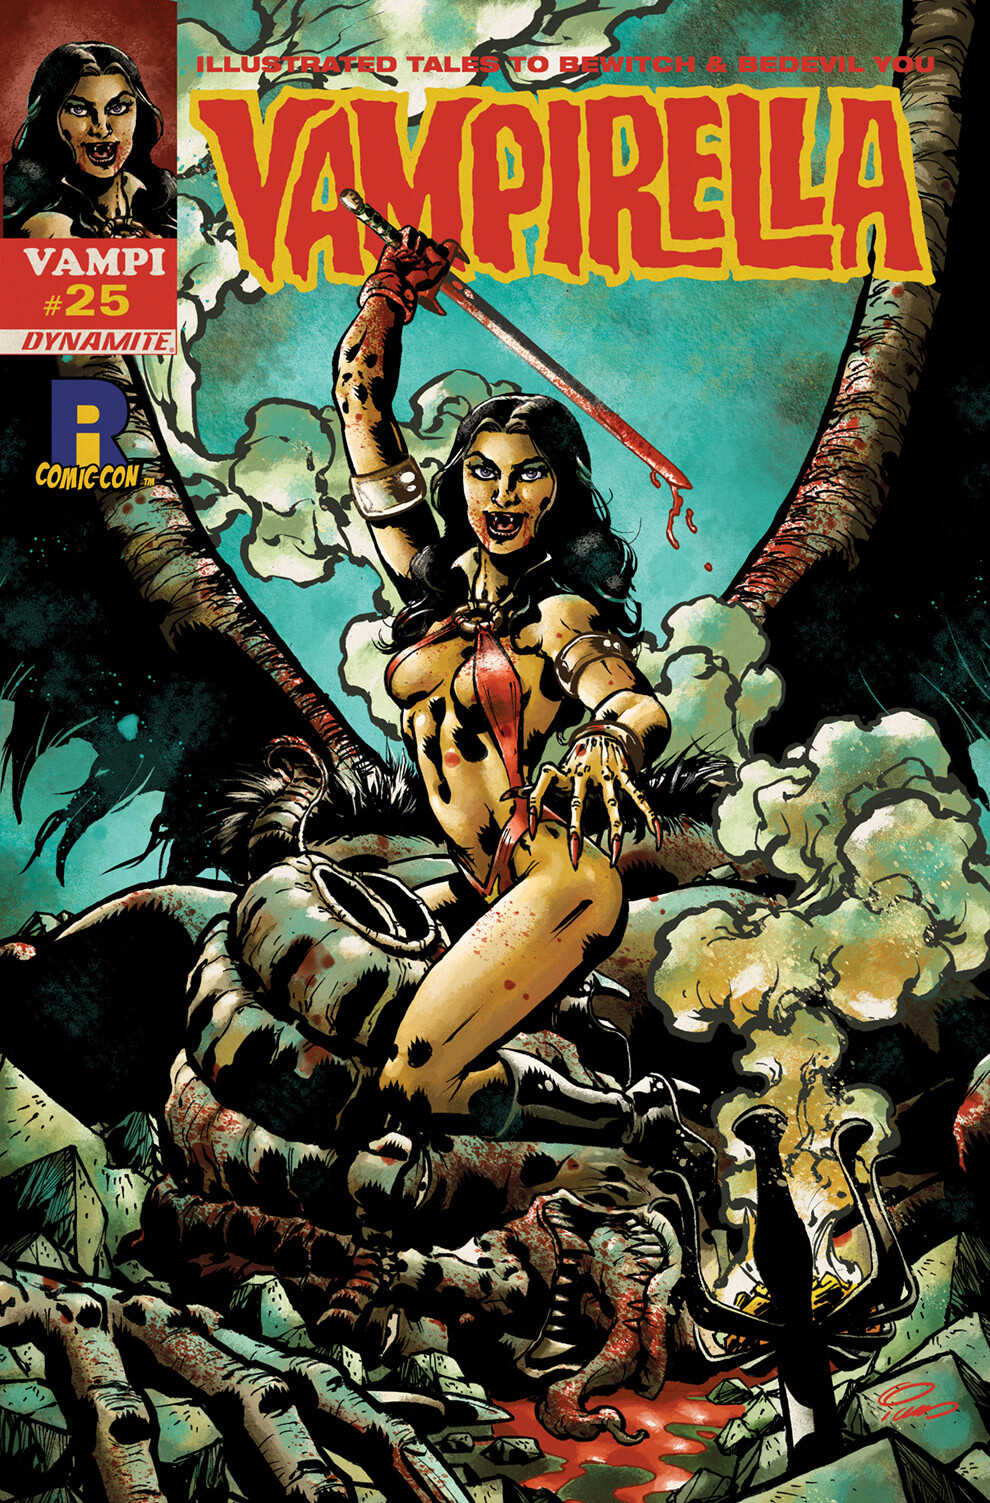 Vampirella Cover art as published by Dynamite Comics. I did the pencils, inks, colors, corner box art, and the lettering for this one.